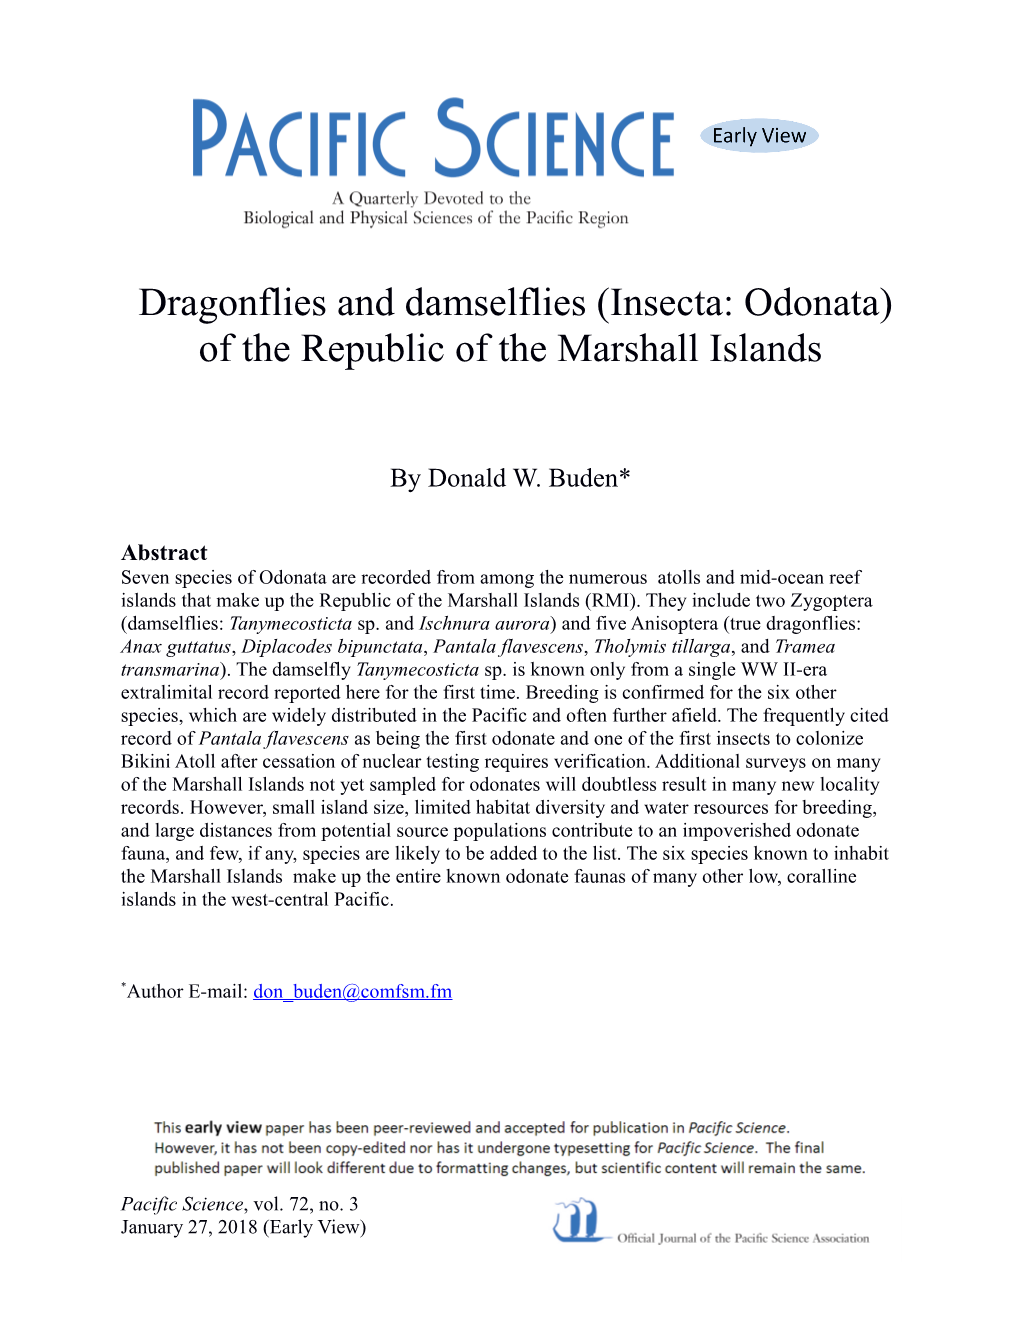 Dragonflies and Damselflies (Insecta: Odonata) of the Republic of the Marshall Islands